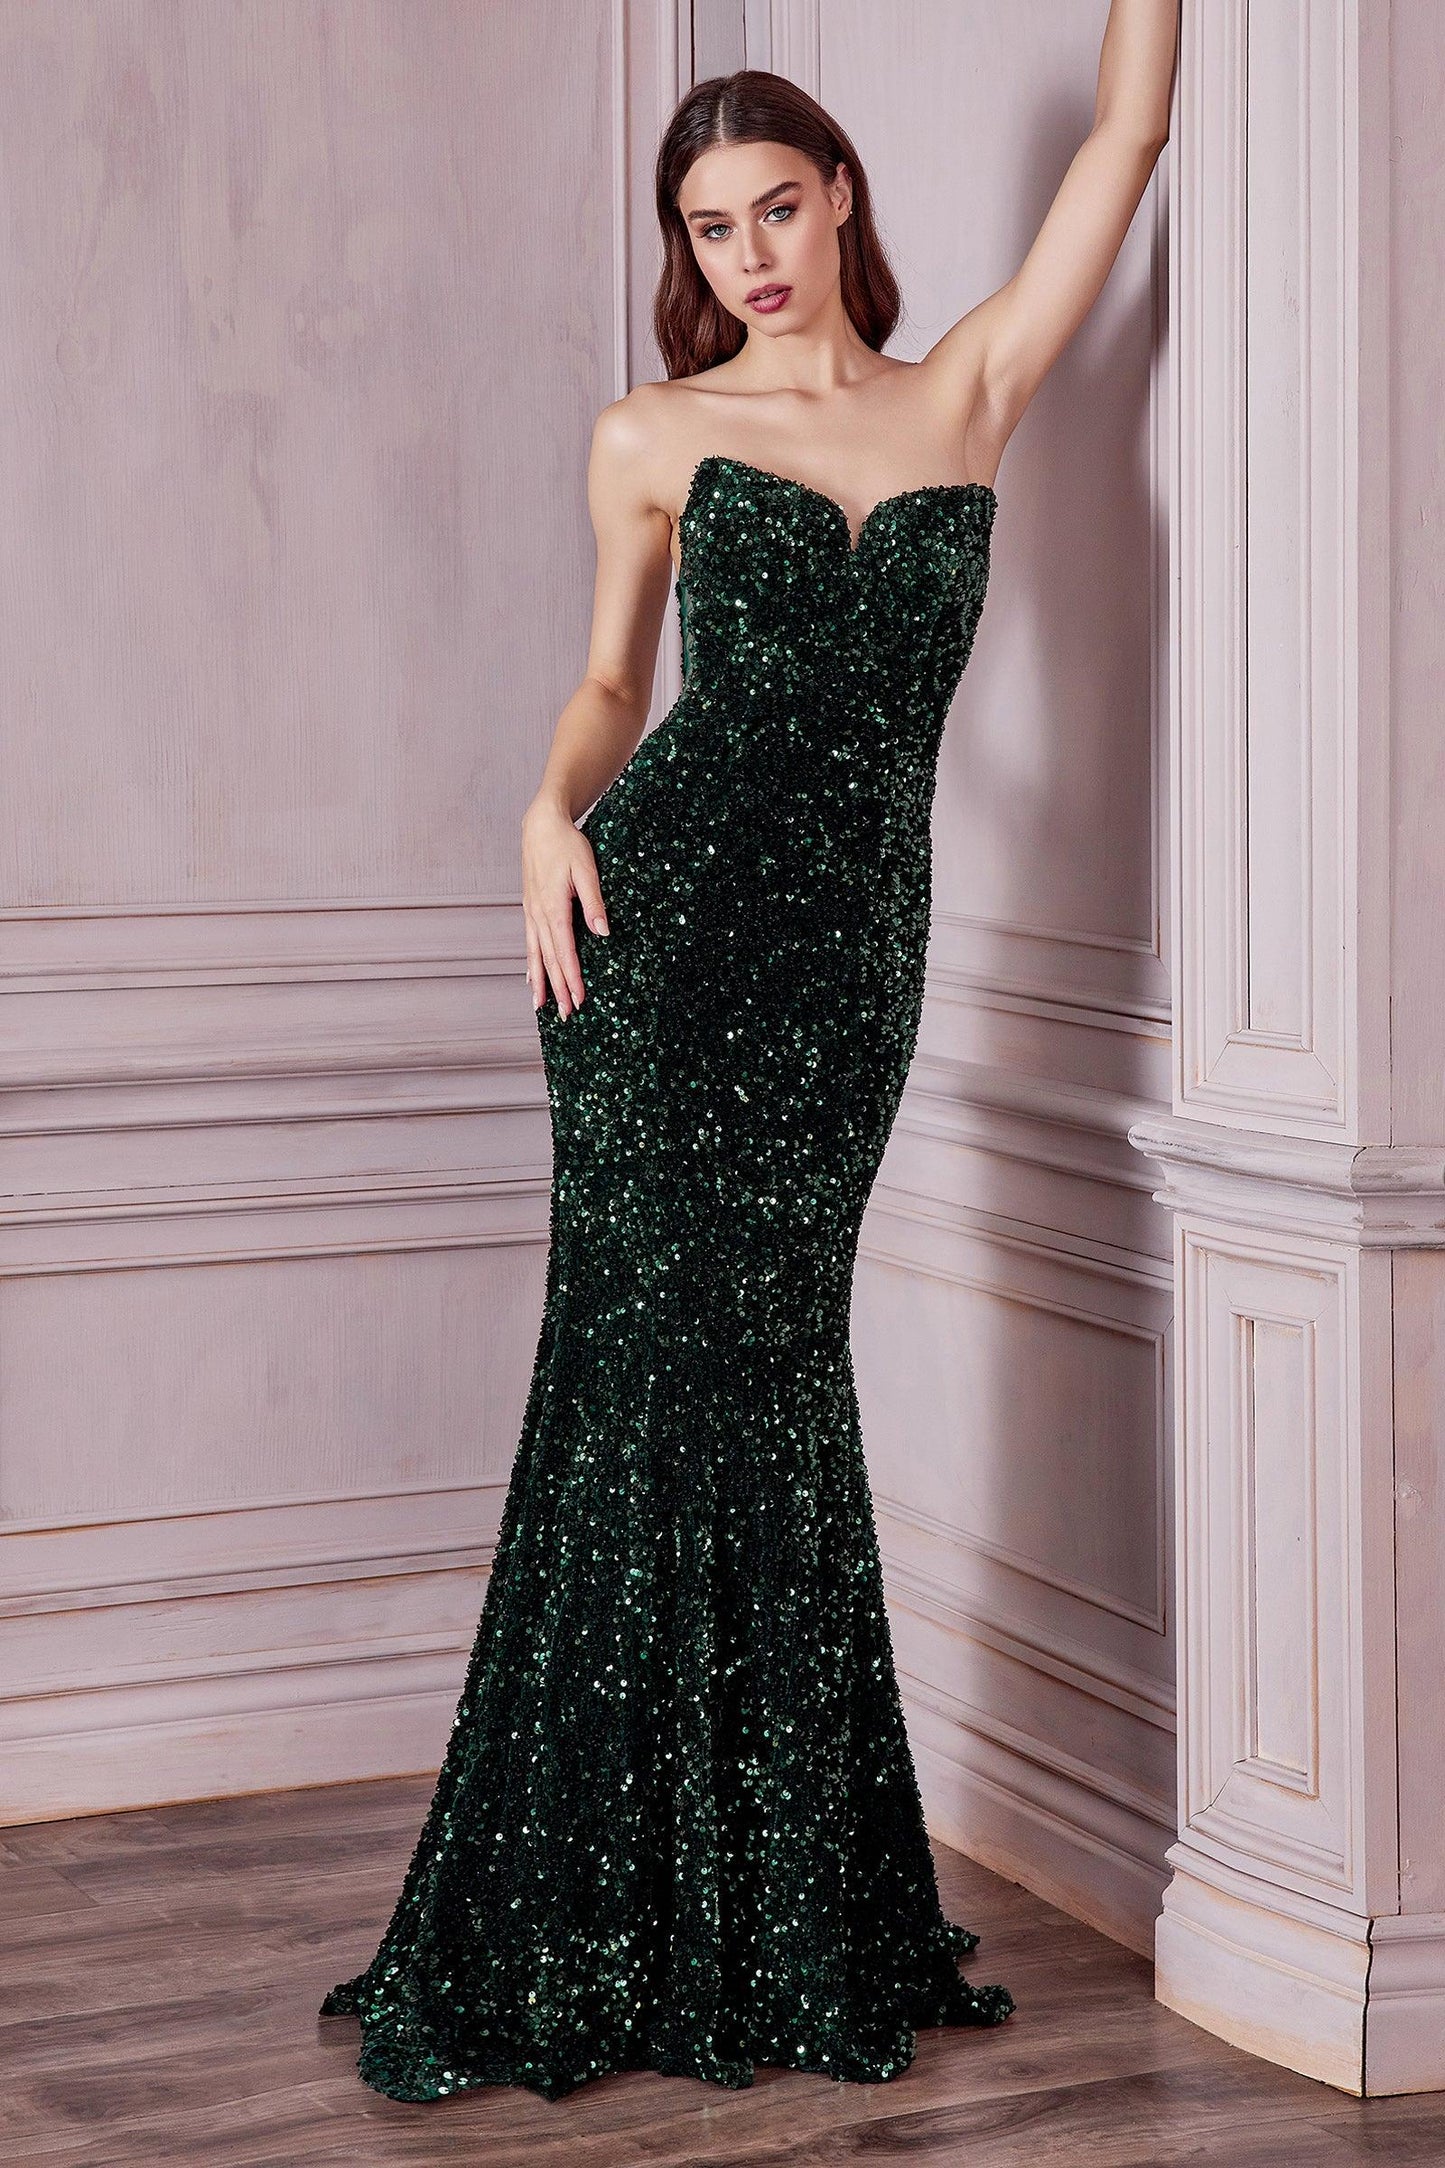 Strapless Long Sequinced Prom Dress - The Dress Outlet